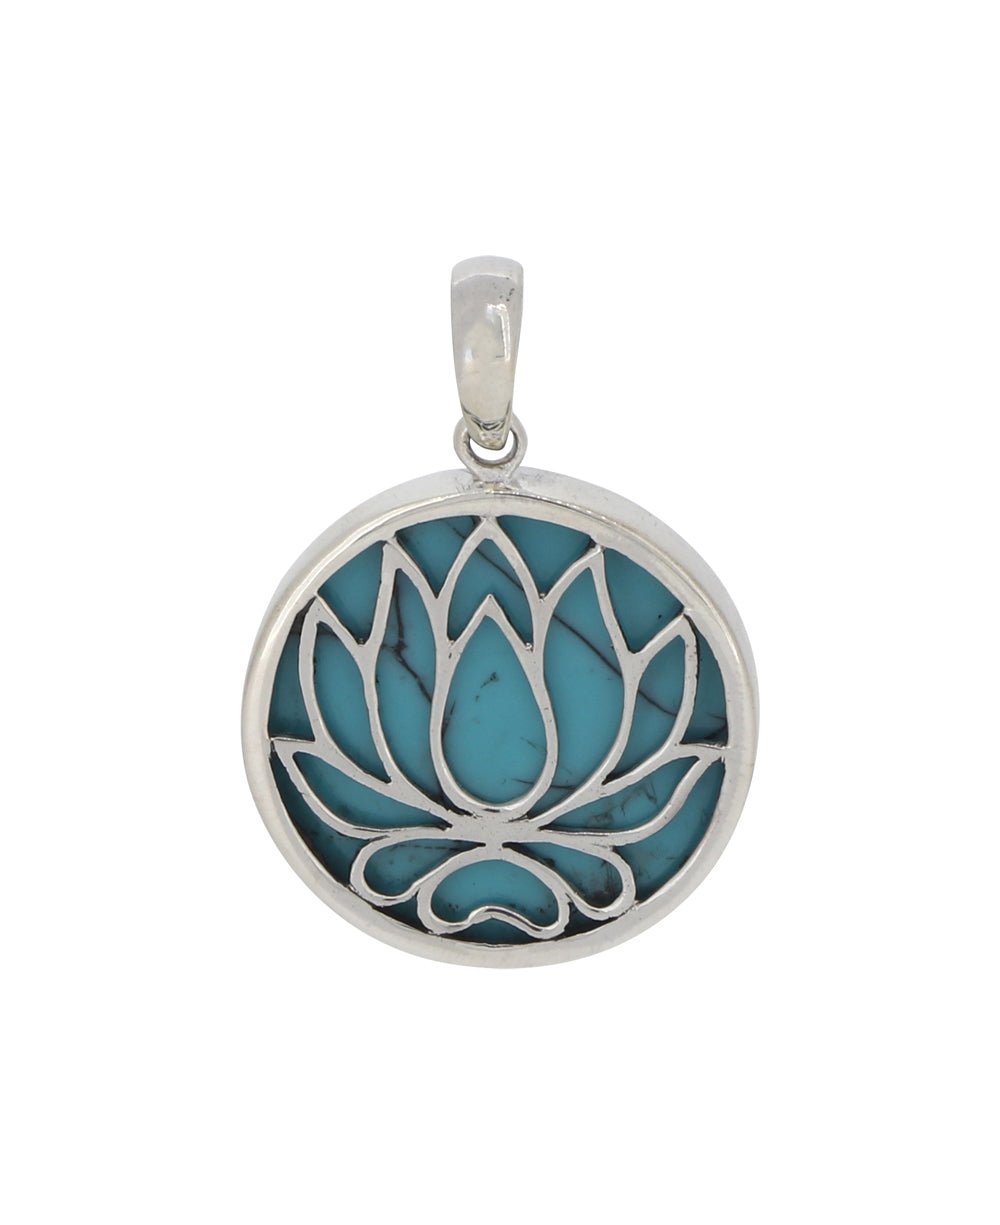 Sterling Silver Lotus Pendant with Reconstituted Turquoise - Charms & Pendants